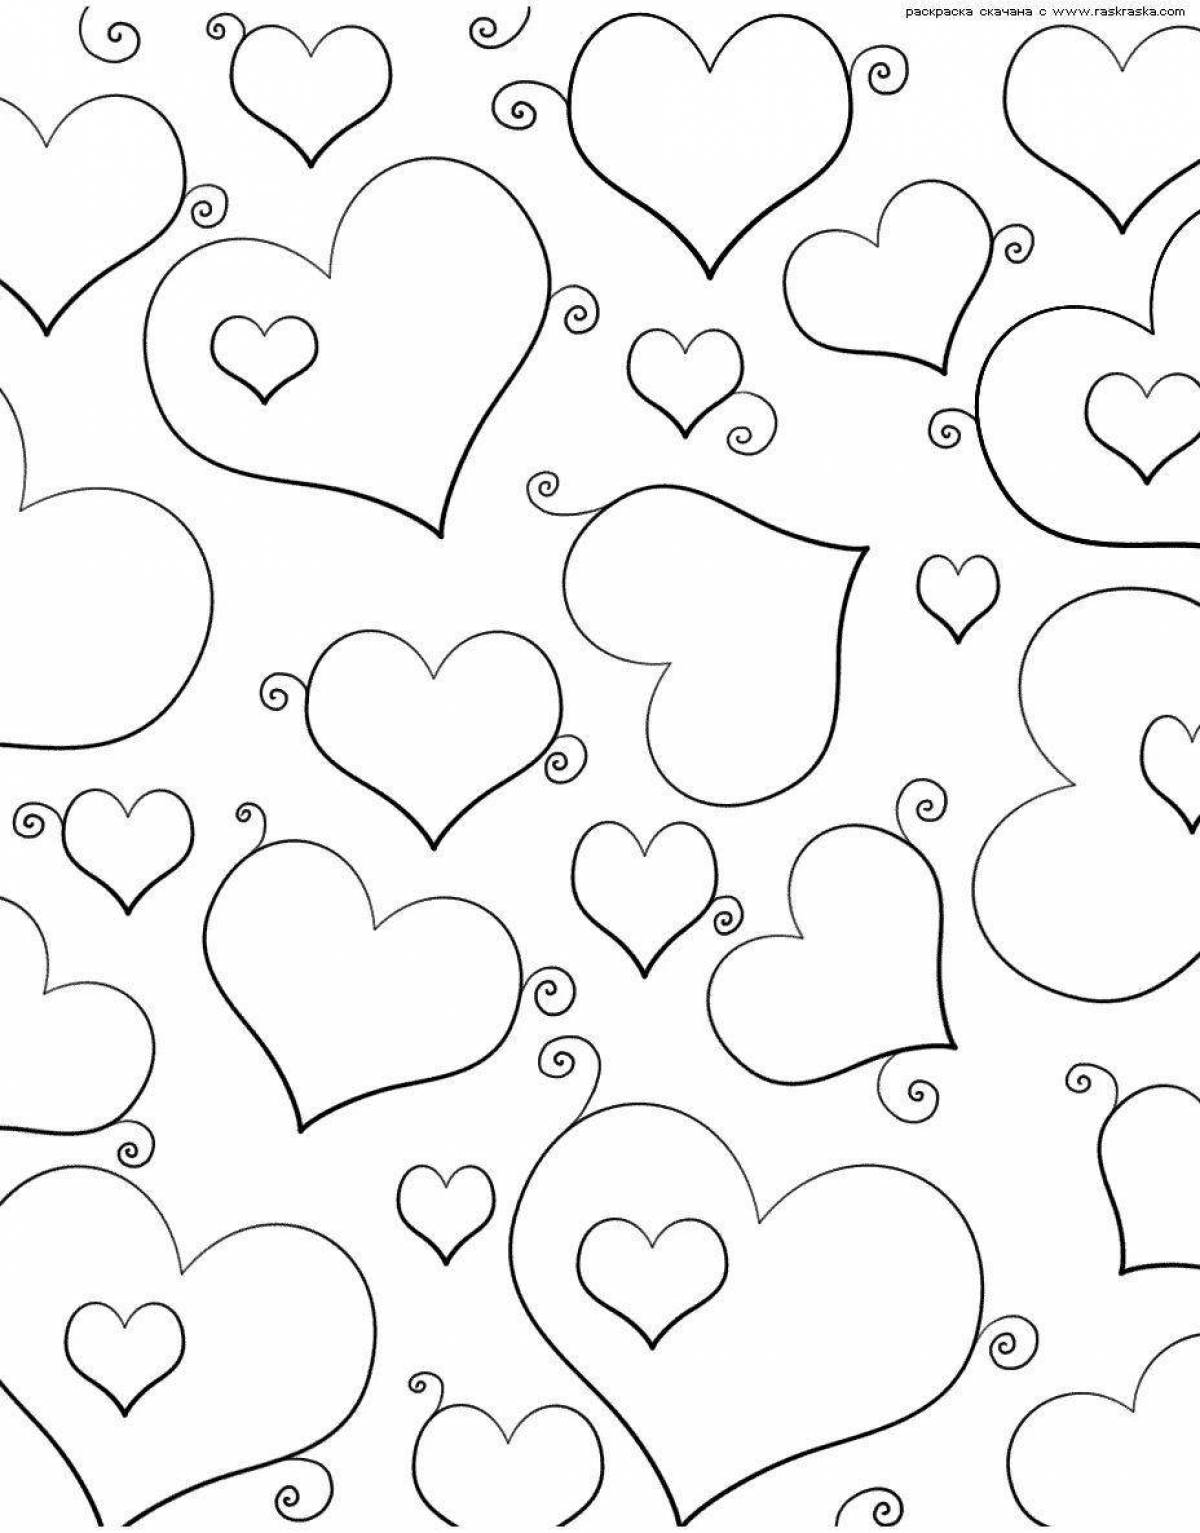 Adorable little hearts coloring book